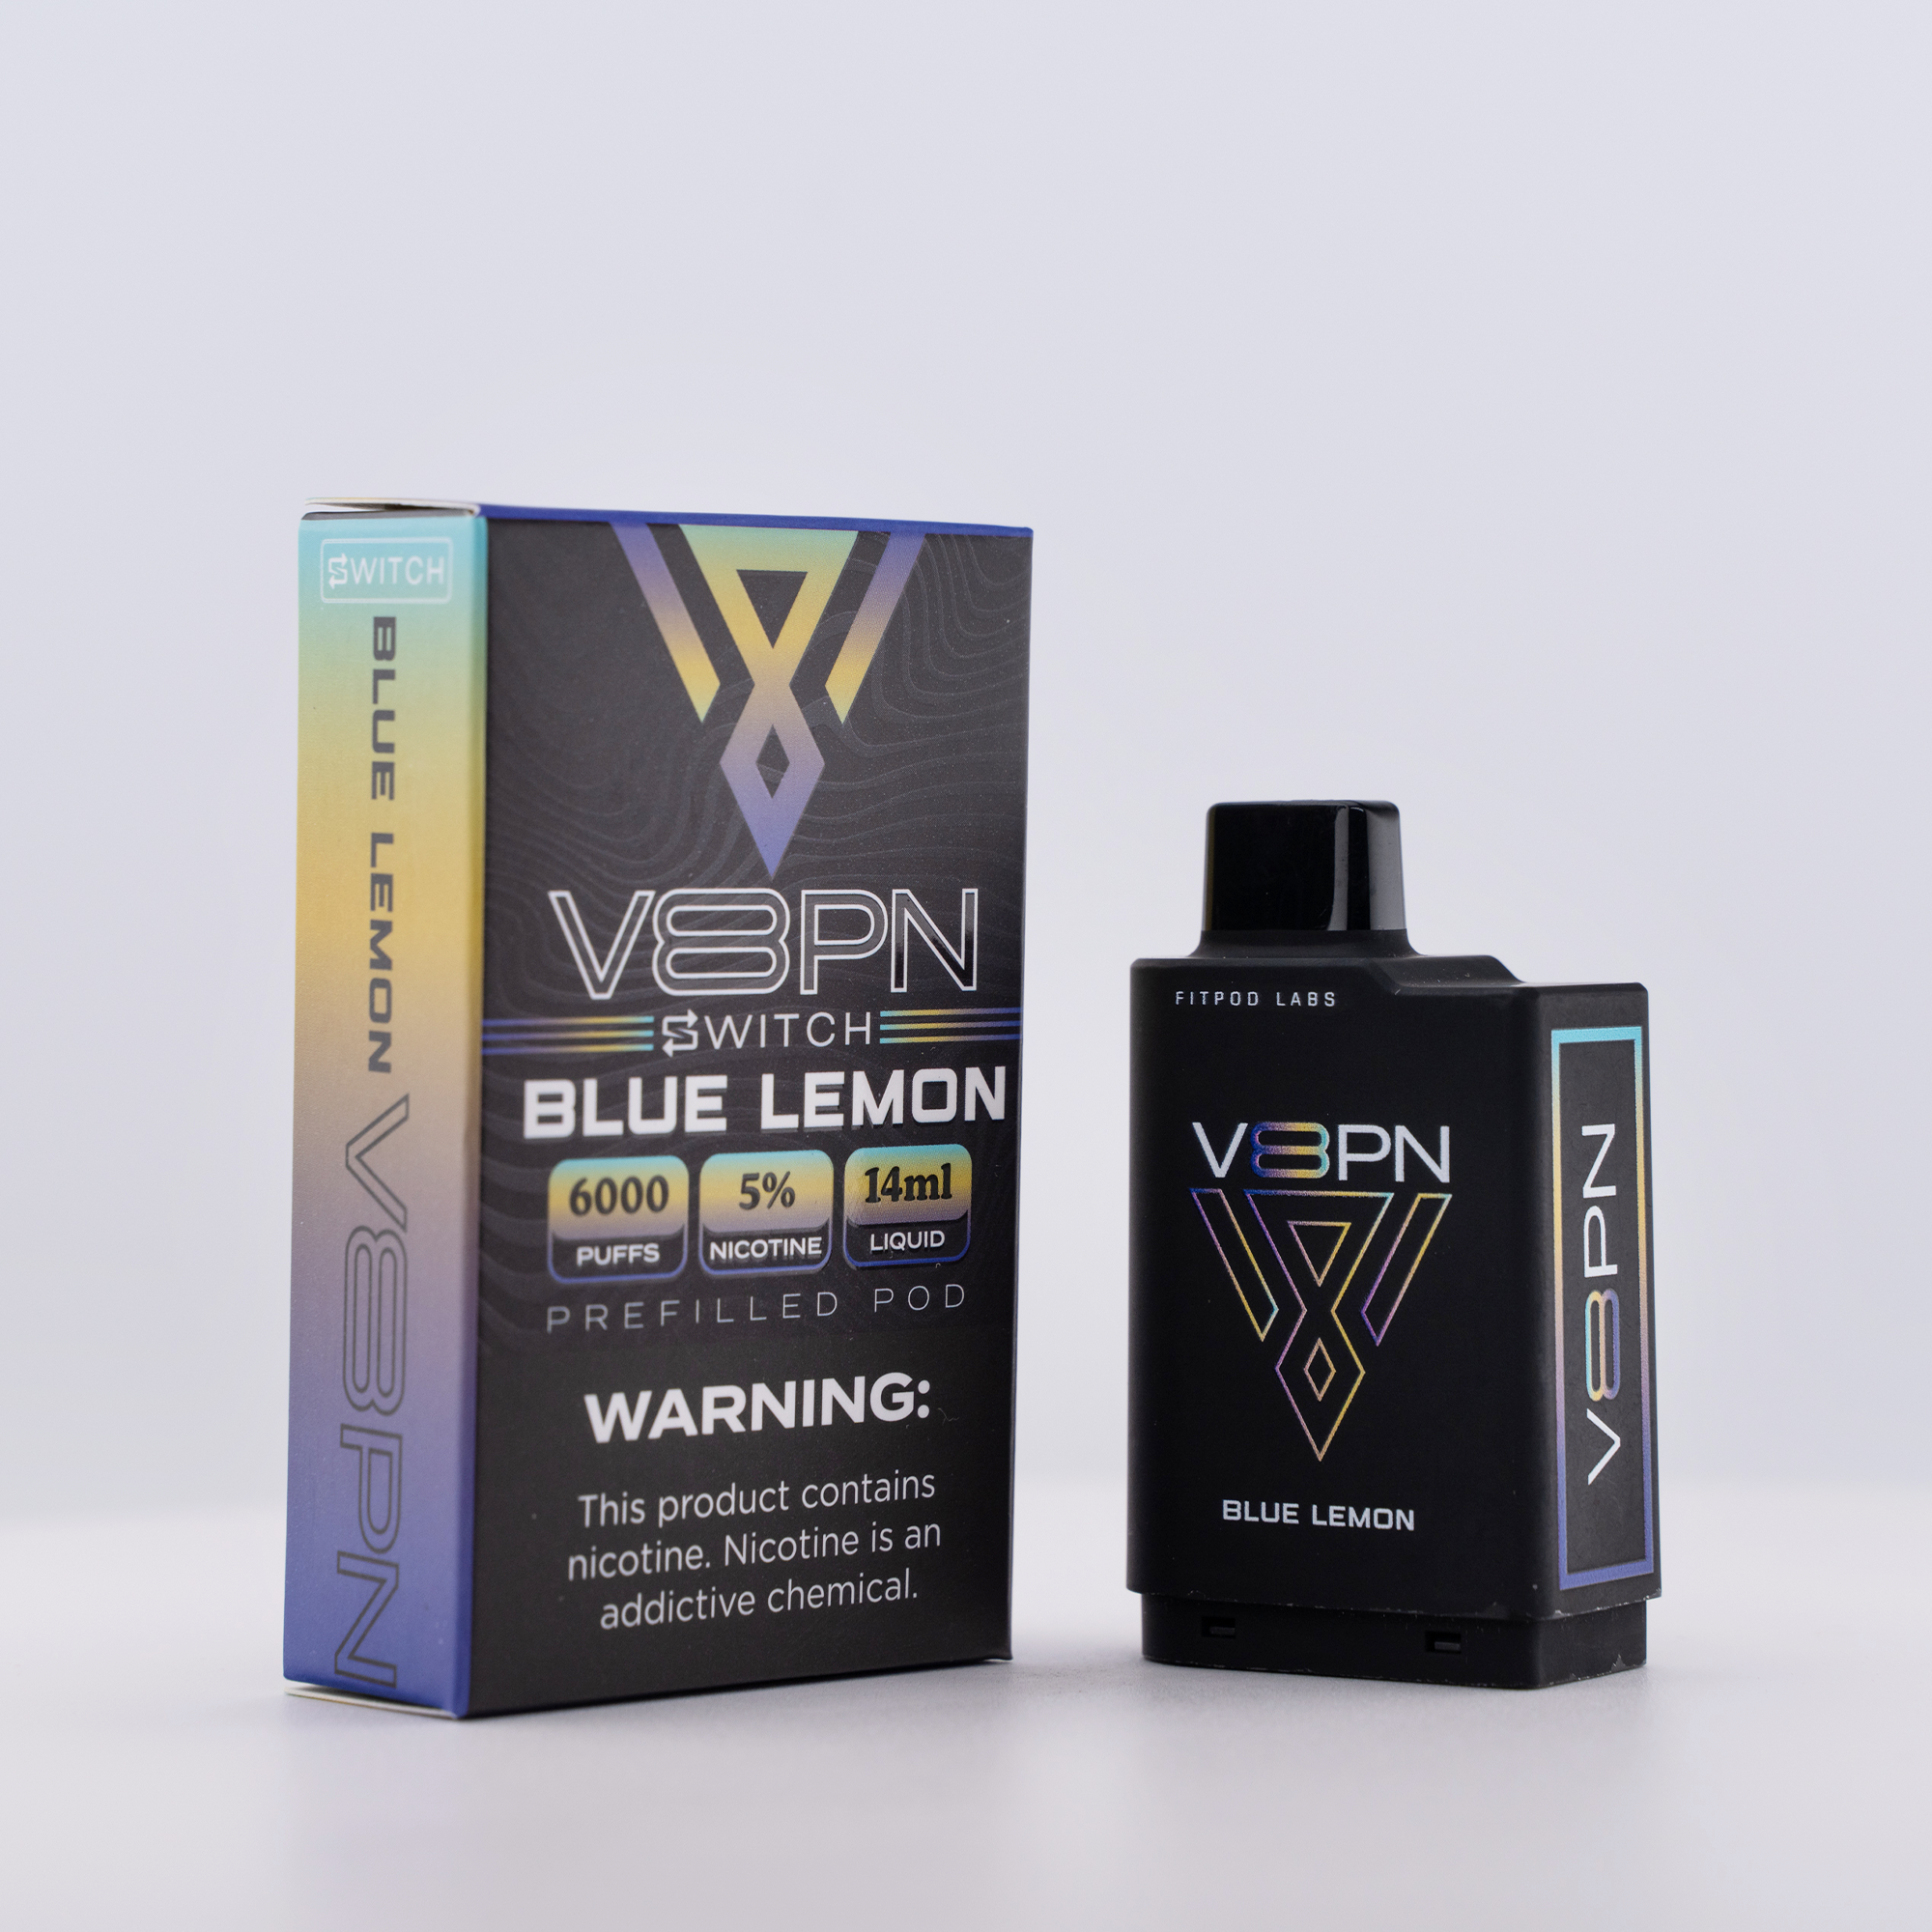 V8PN Switch Disposable Vape 6000 Puffs